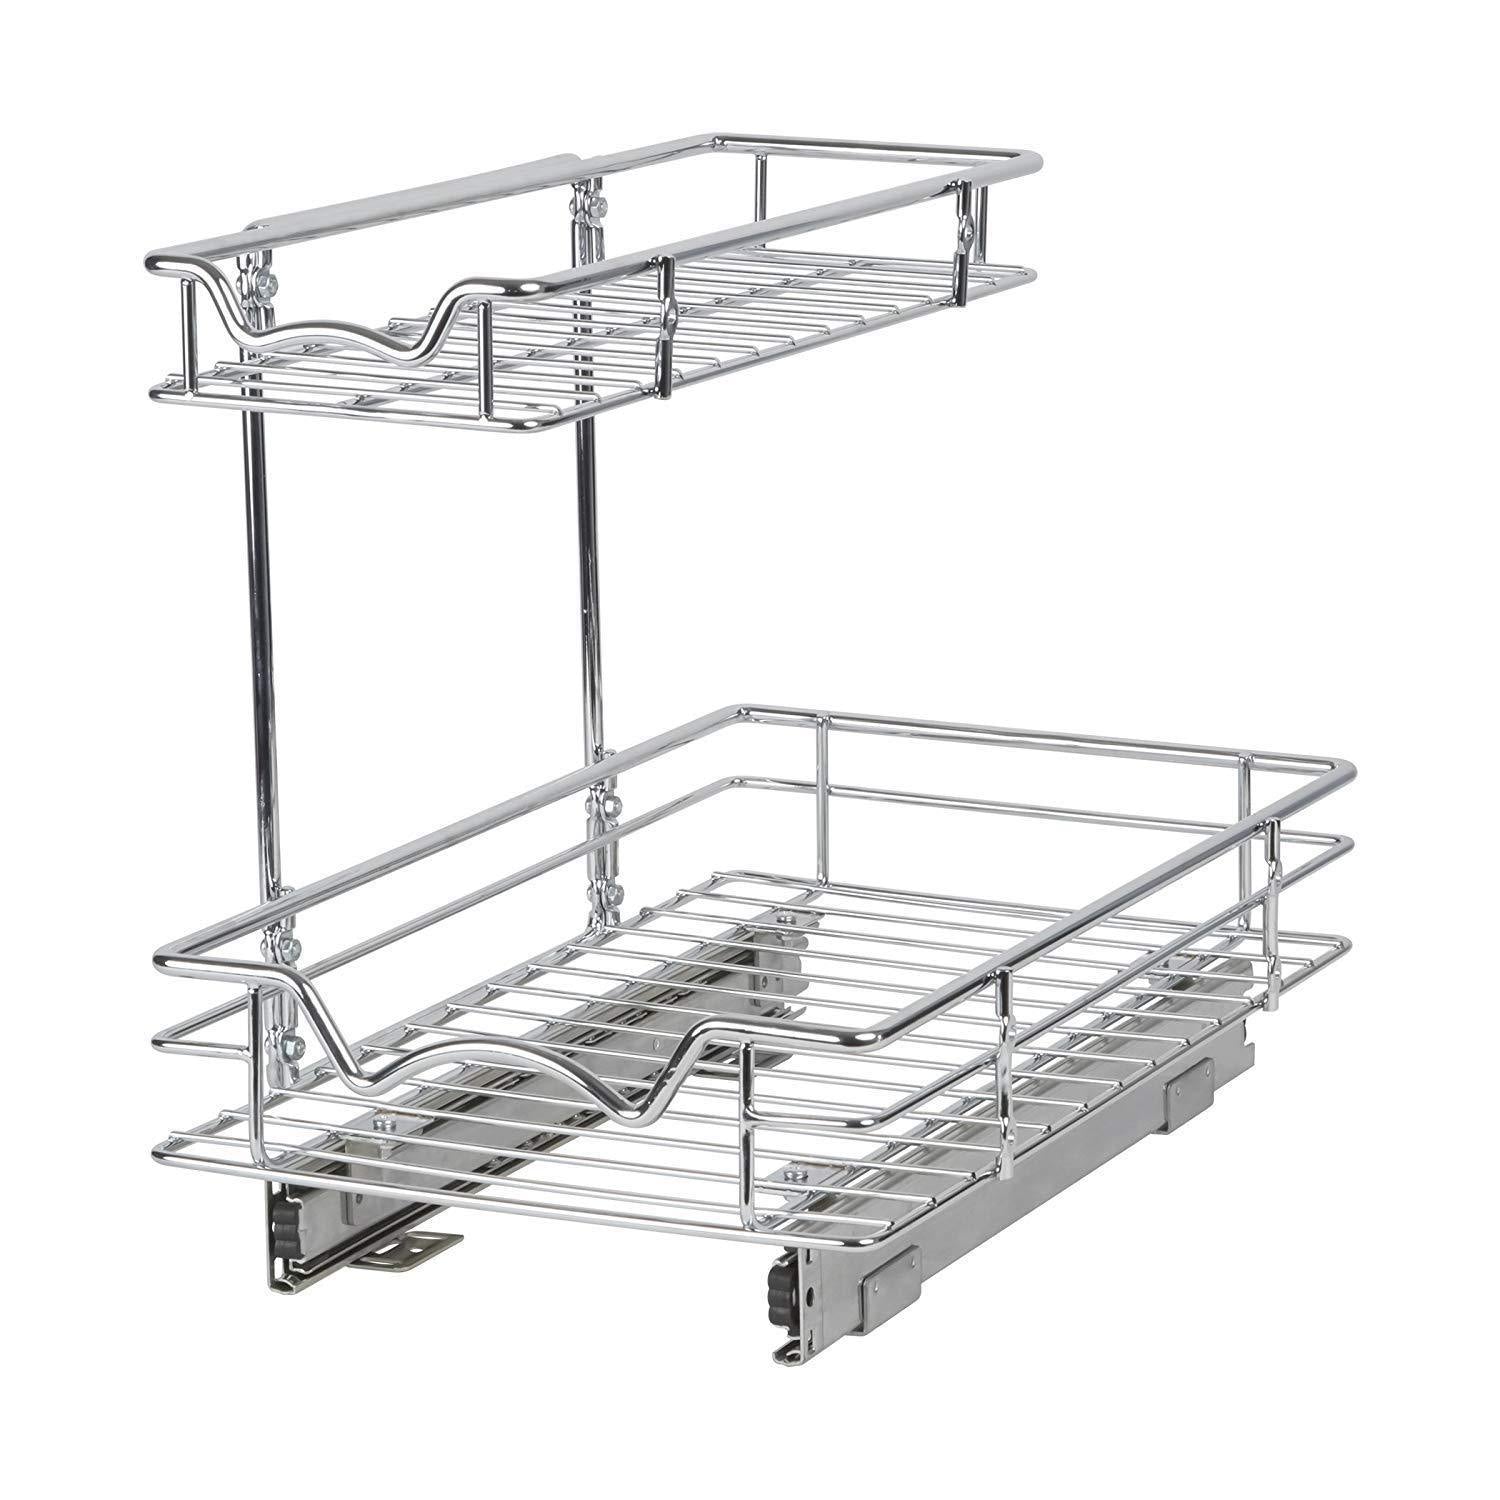 Discover the slide out cabinet organizer 11w x 18d x 14 1 2h requires at least 12 cabinet opening kitchen cabinet pull out two tier roll out sliding shelves storage organizer for extra storage